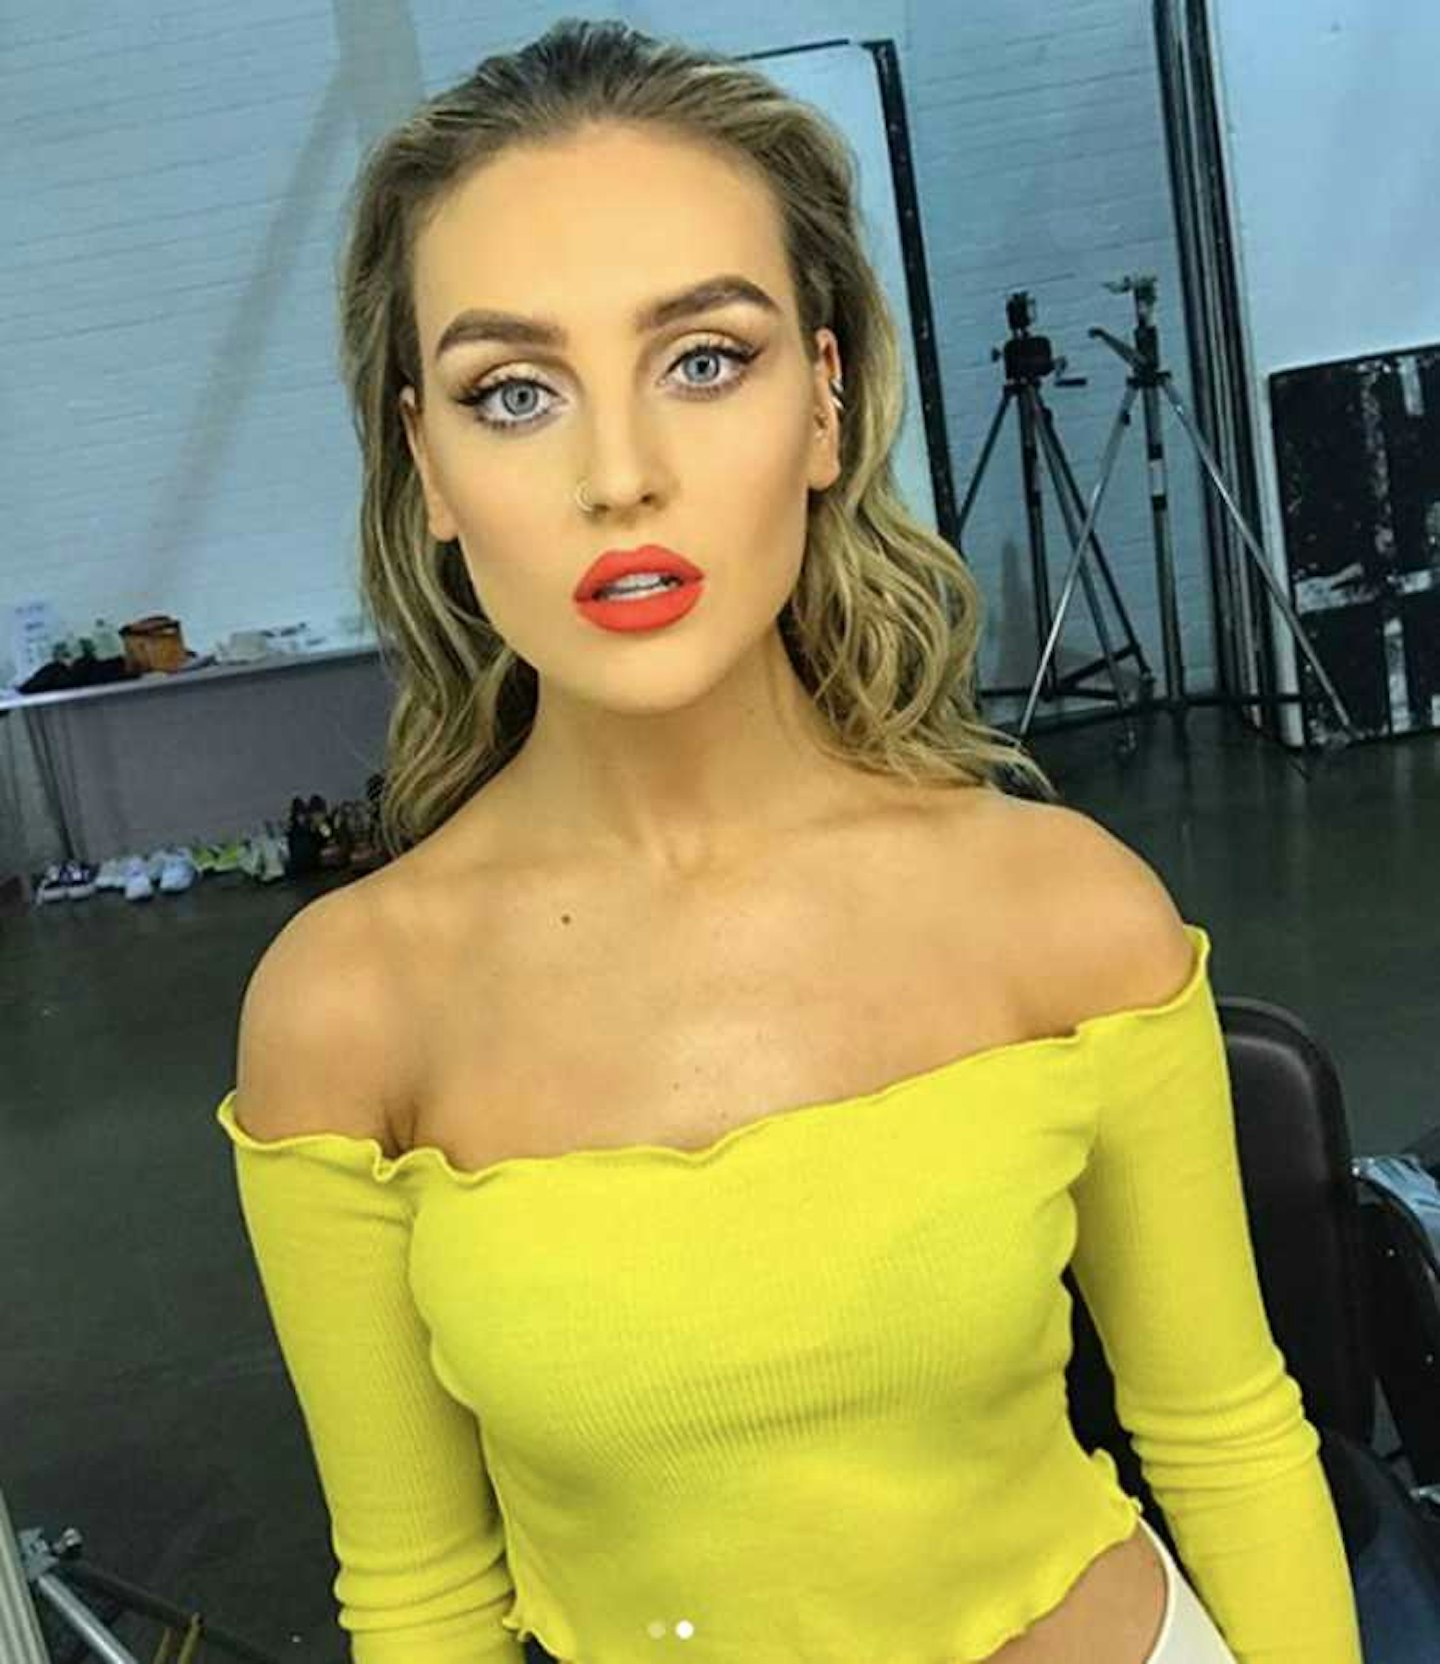 Perrie Edwards now